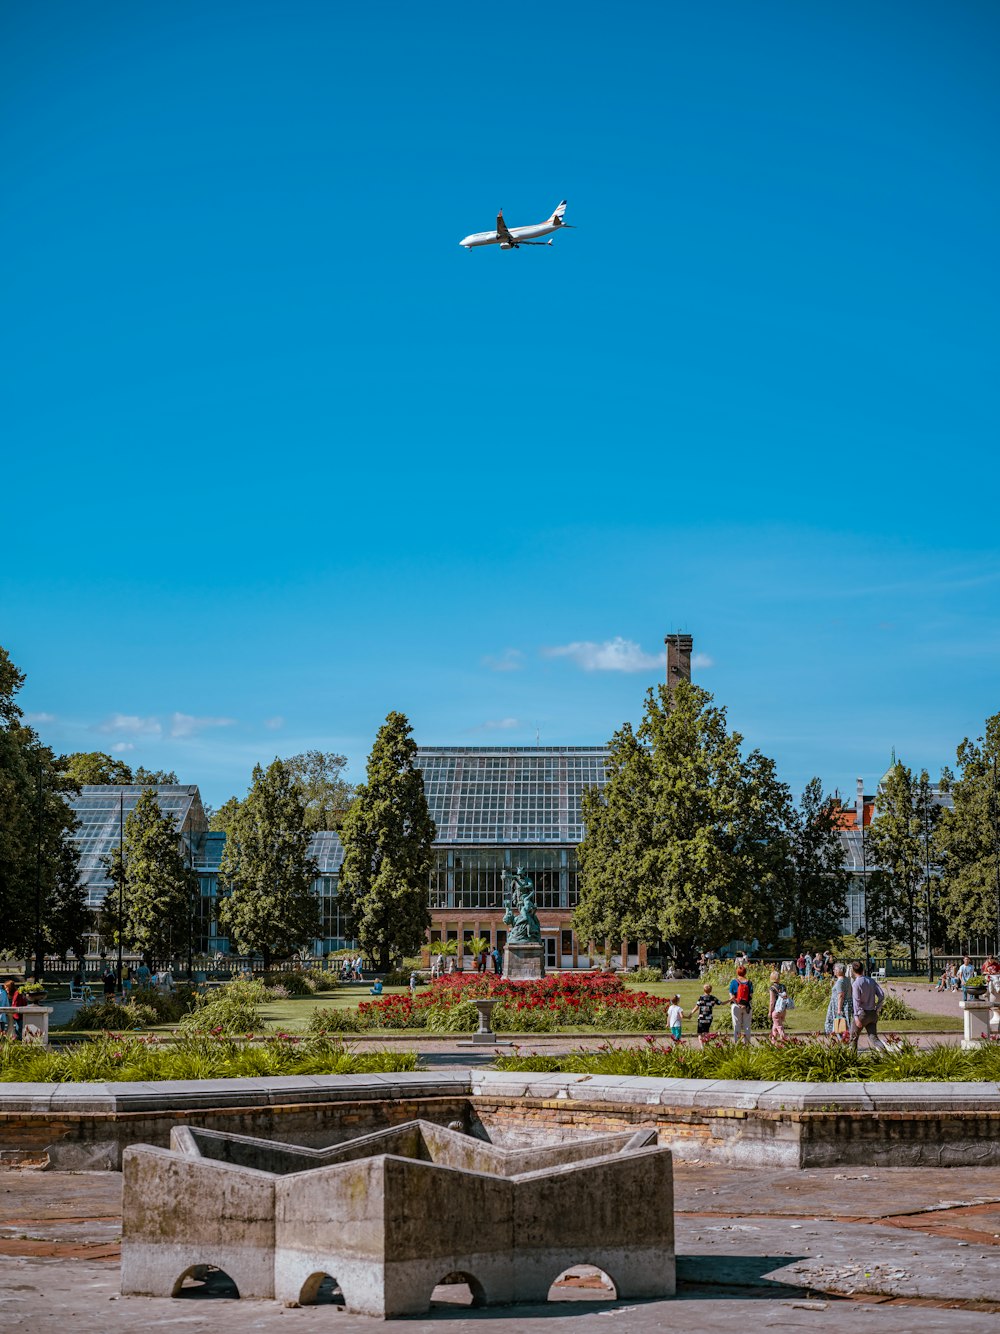 a plane flying over a park